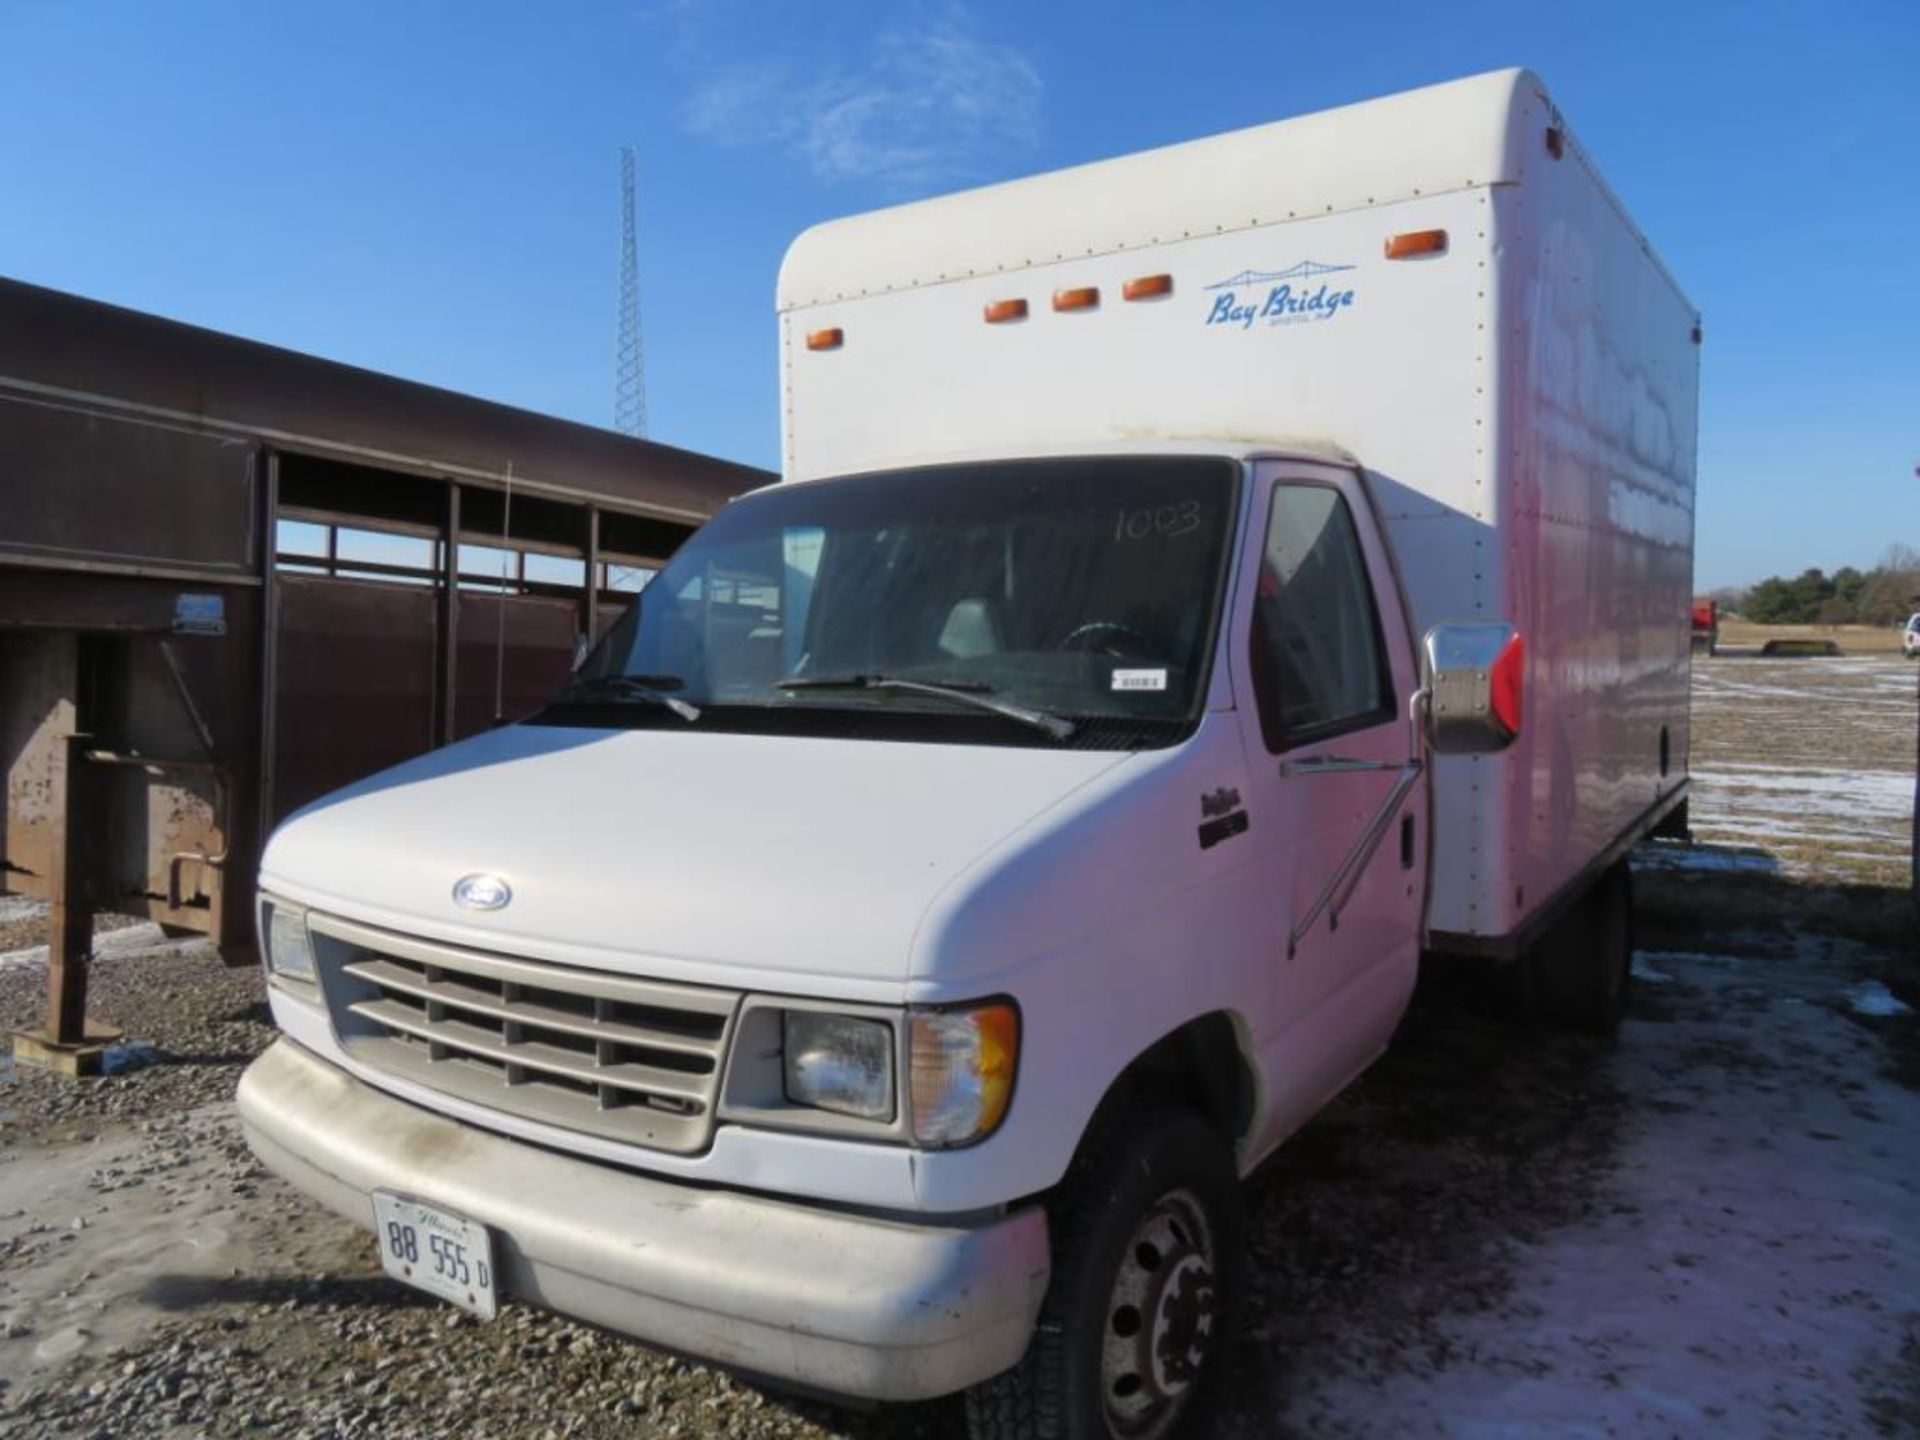 1993 Ford E-350 Econoline Box Truck (title) 35,000 miles on new engine, 2 owner, Good tires, and